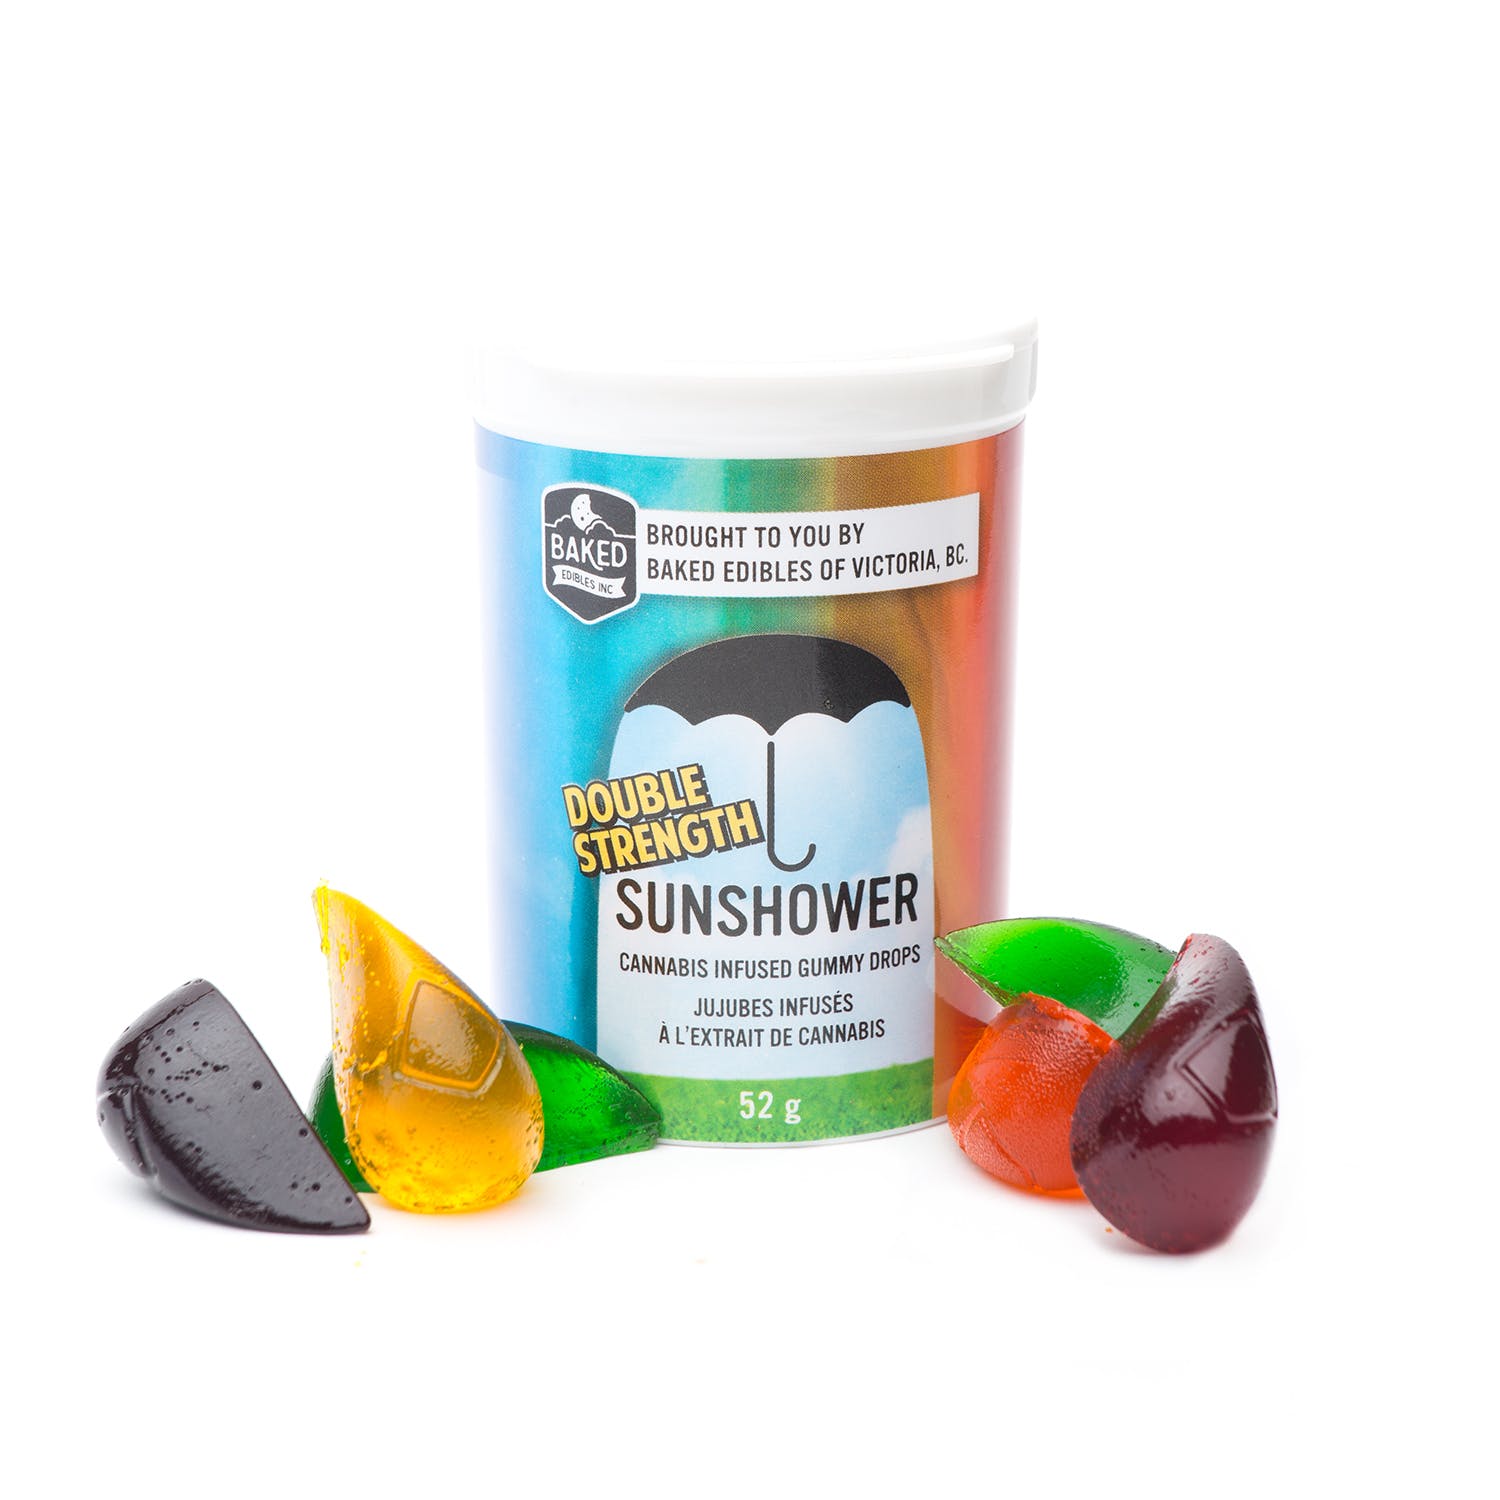 150mg Sunshower Gummies by Baked Edibles